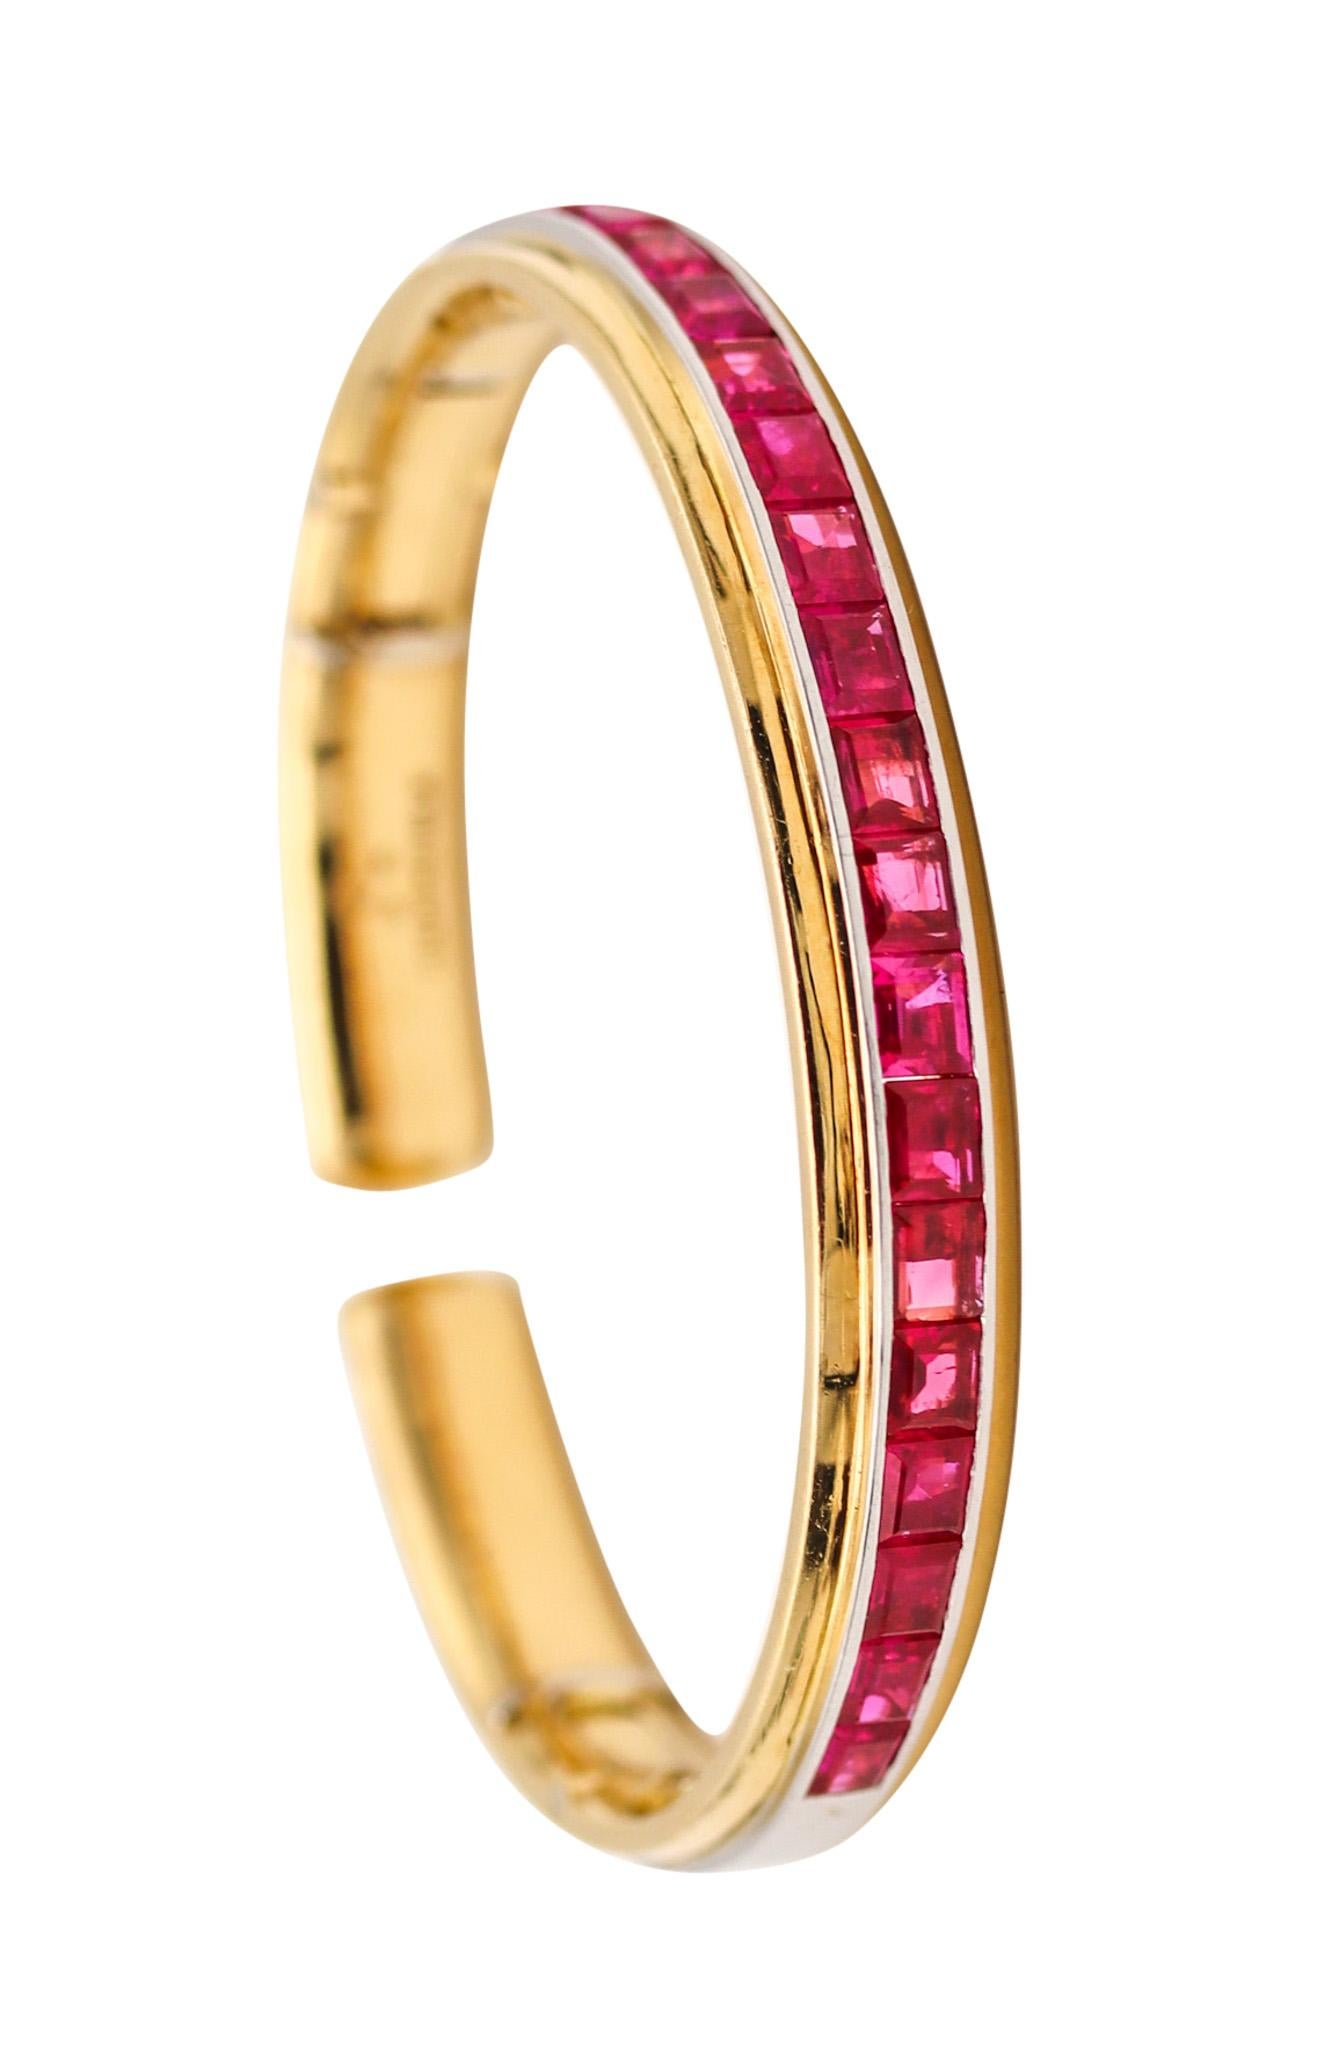 Hemmerle Bangle Bracelet In 18Kt Gold And Platinum With 22.65 Ctw Red Rubies For Sale